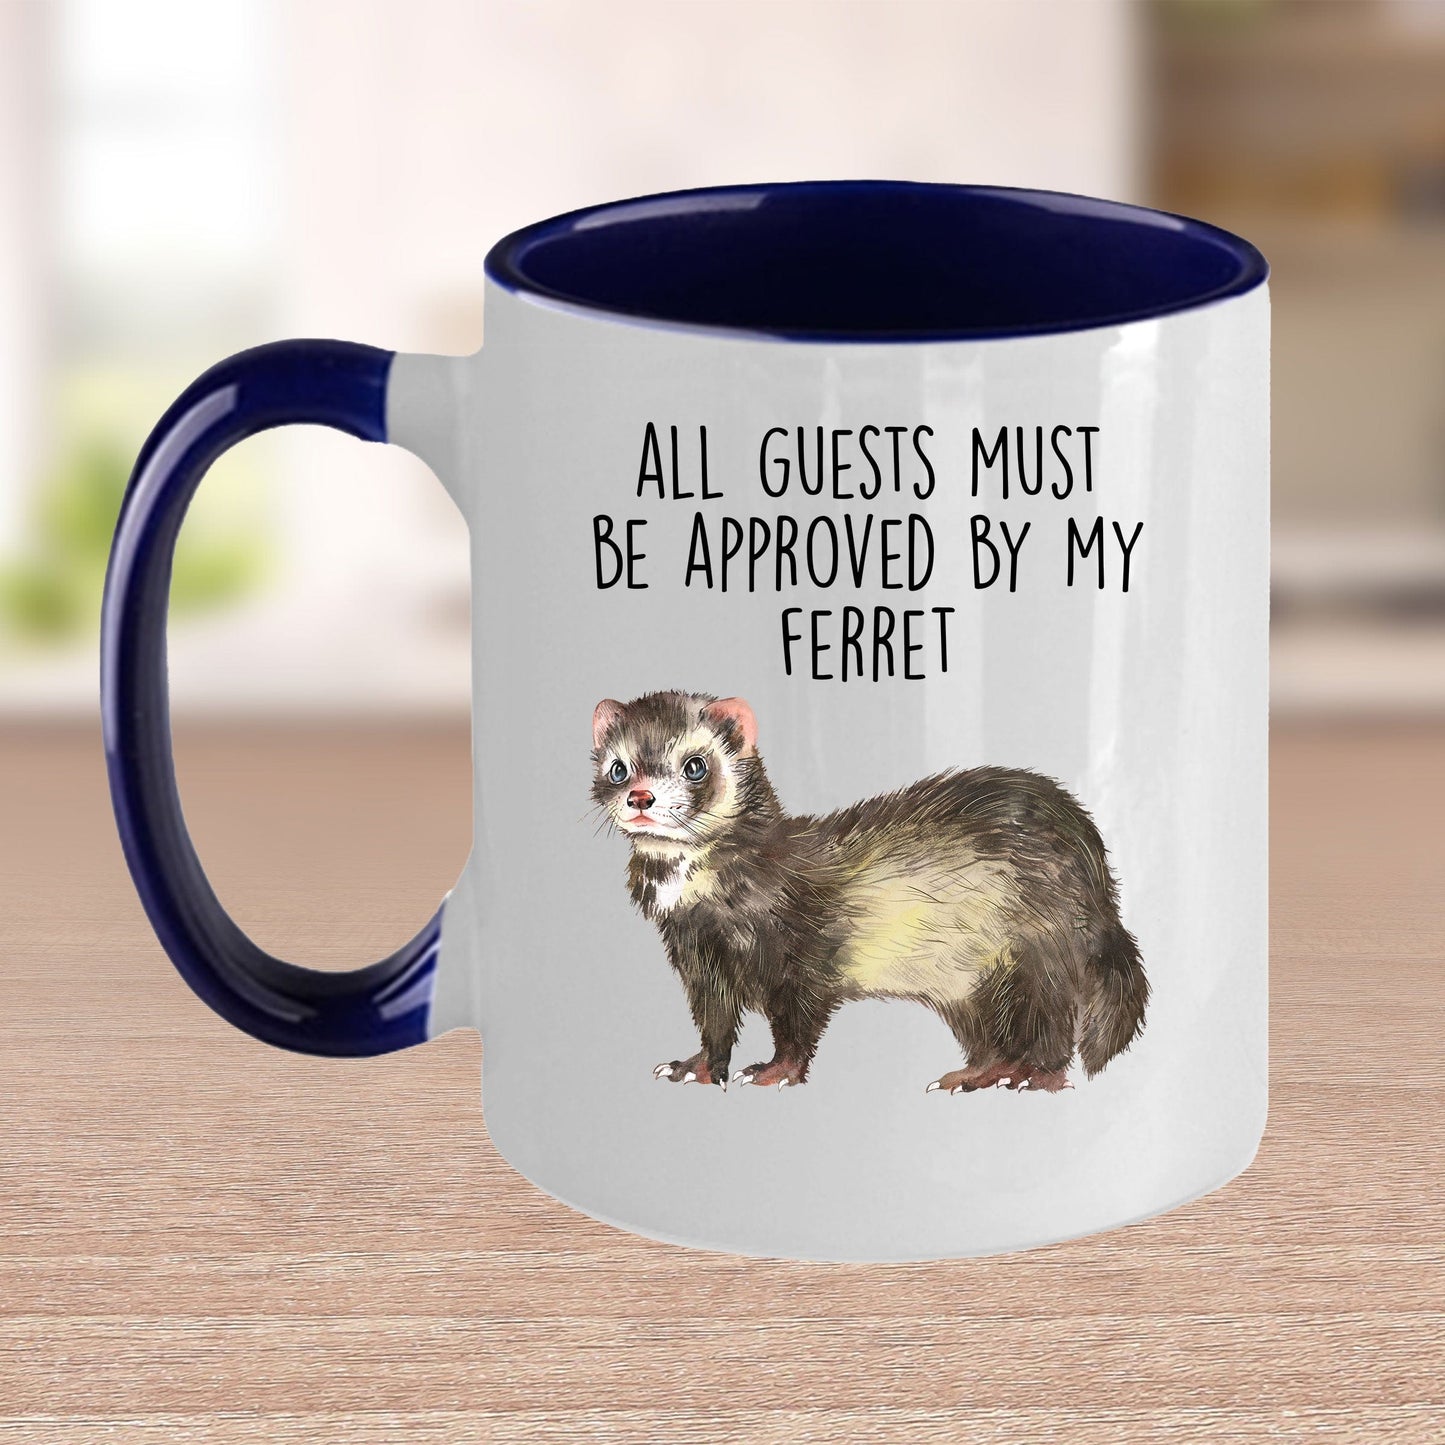 Funny Ferret Custom Ceramic Coffee Mug - All Guests Must Be approved By My Ferret